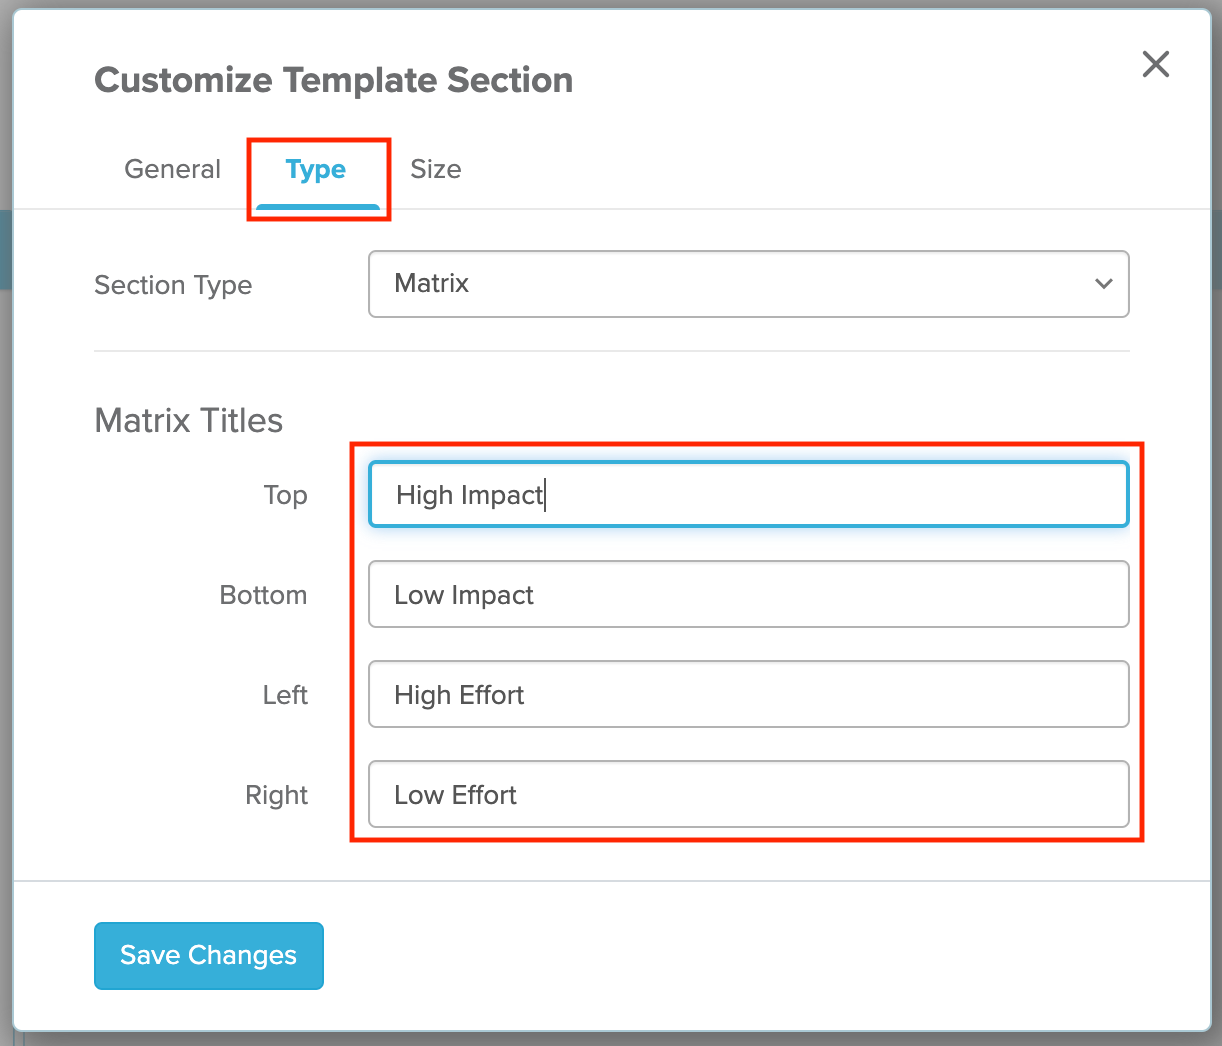 Type tab selected in Customize Template Section Menu